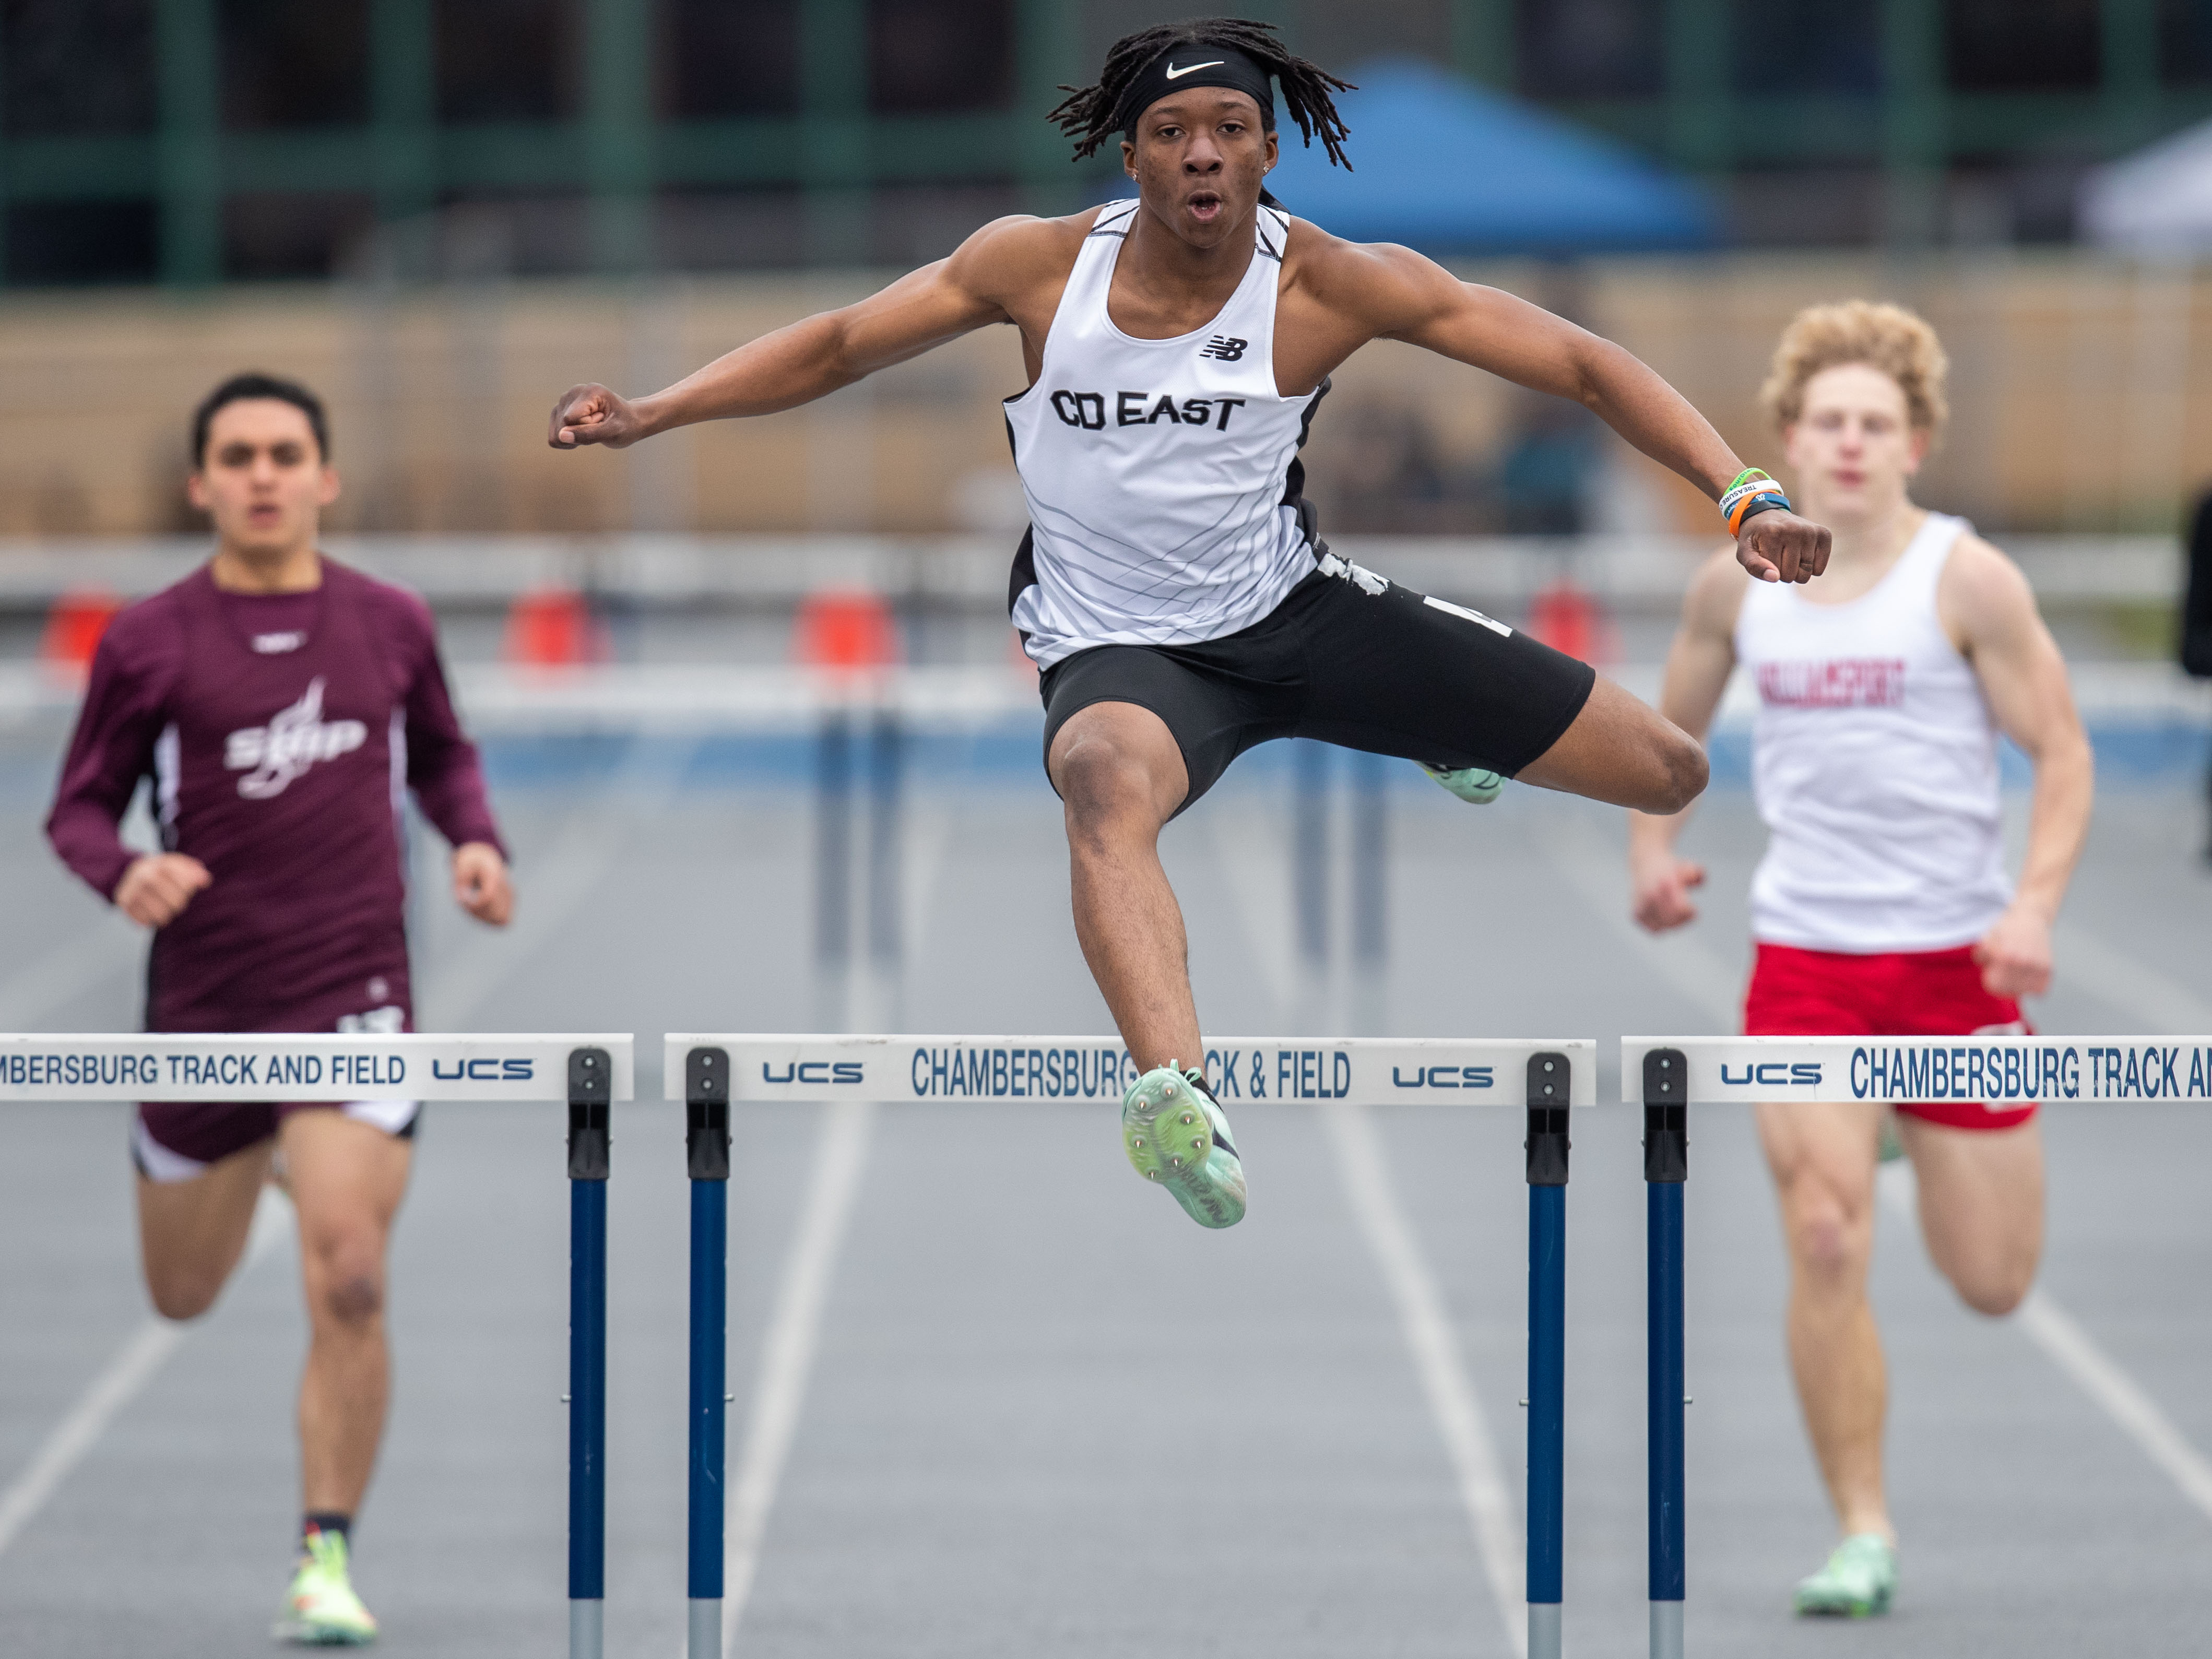 Steve Combary, Central Dauphin East, wins the 300 meter hurdles at the 2023 Tim Cook Memorial Invitational track & field meet at Chambersburg, Pa., Mar. 25, 2023.Mark Pynes | pennlive.com